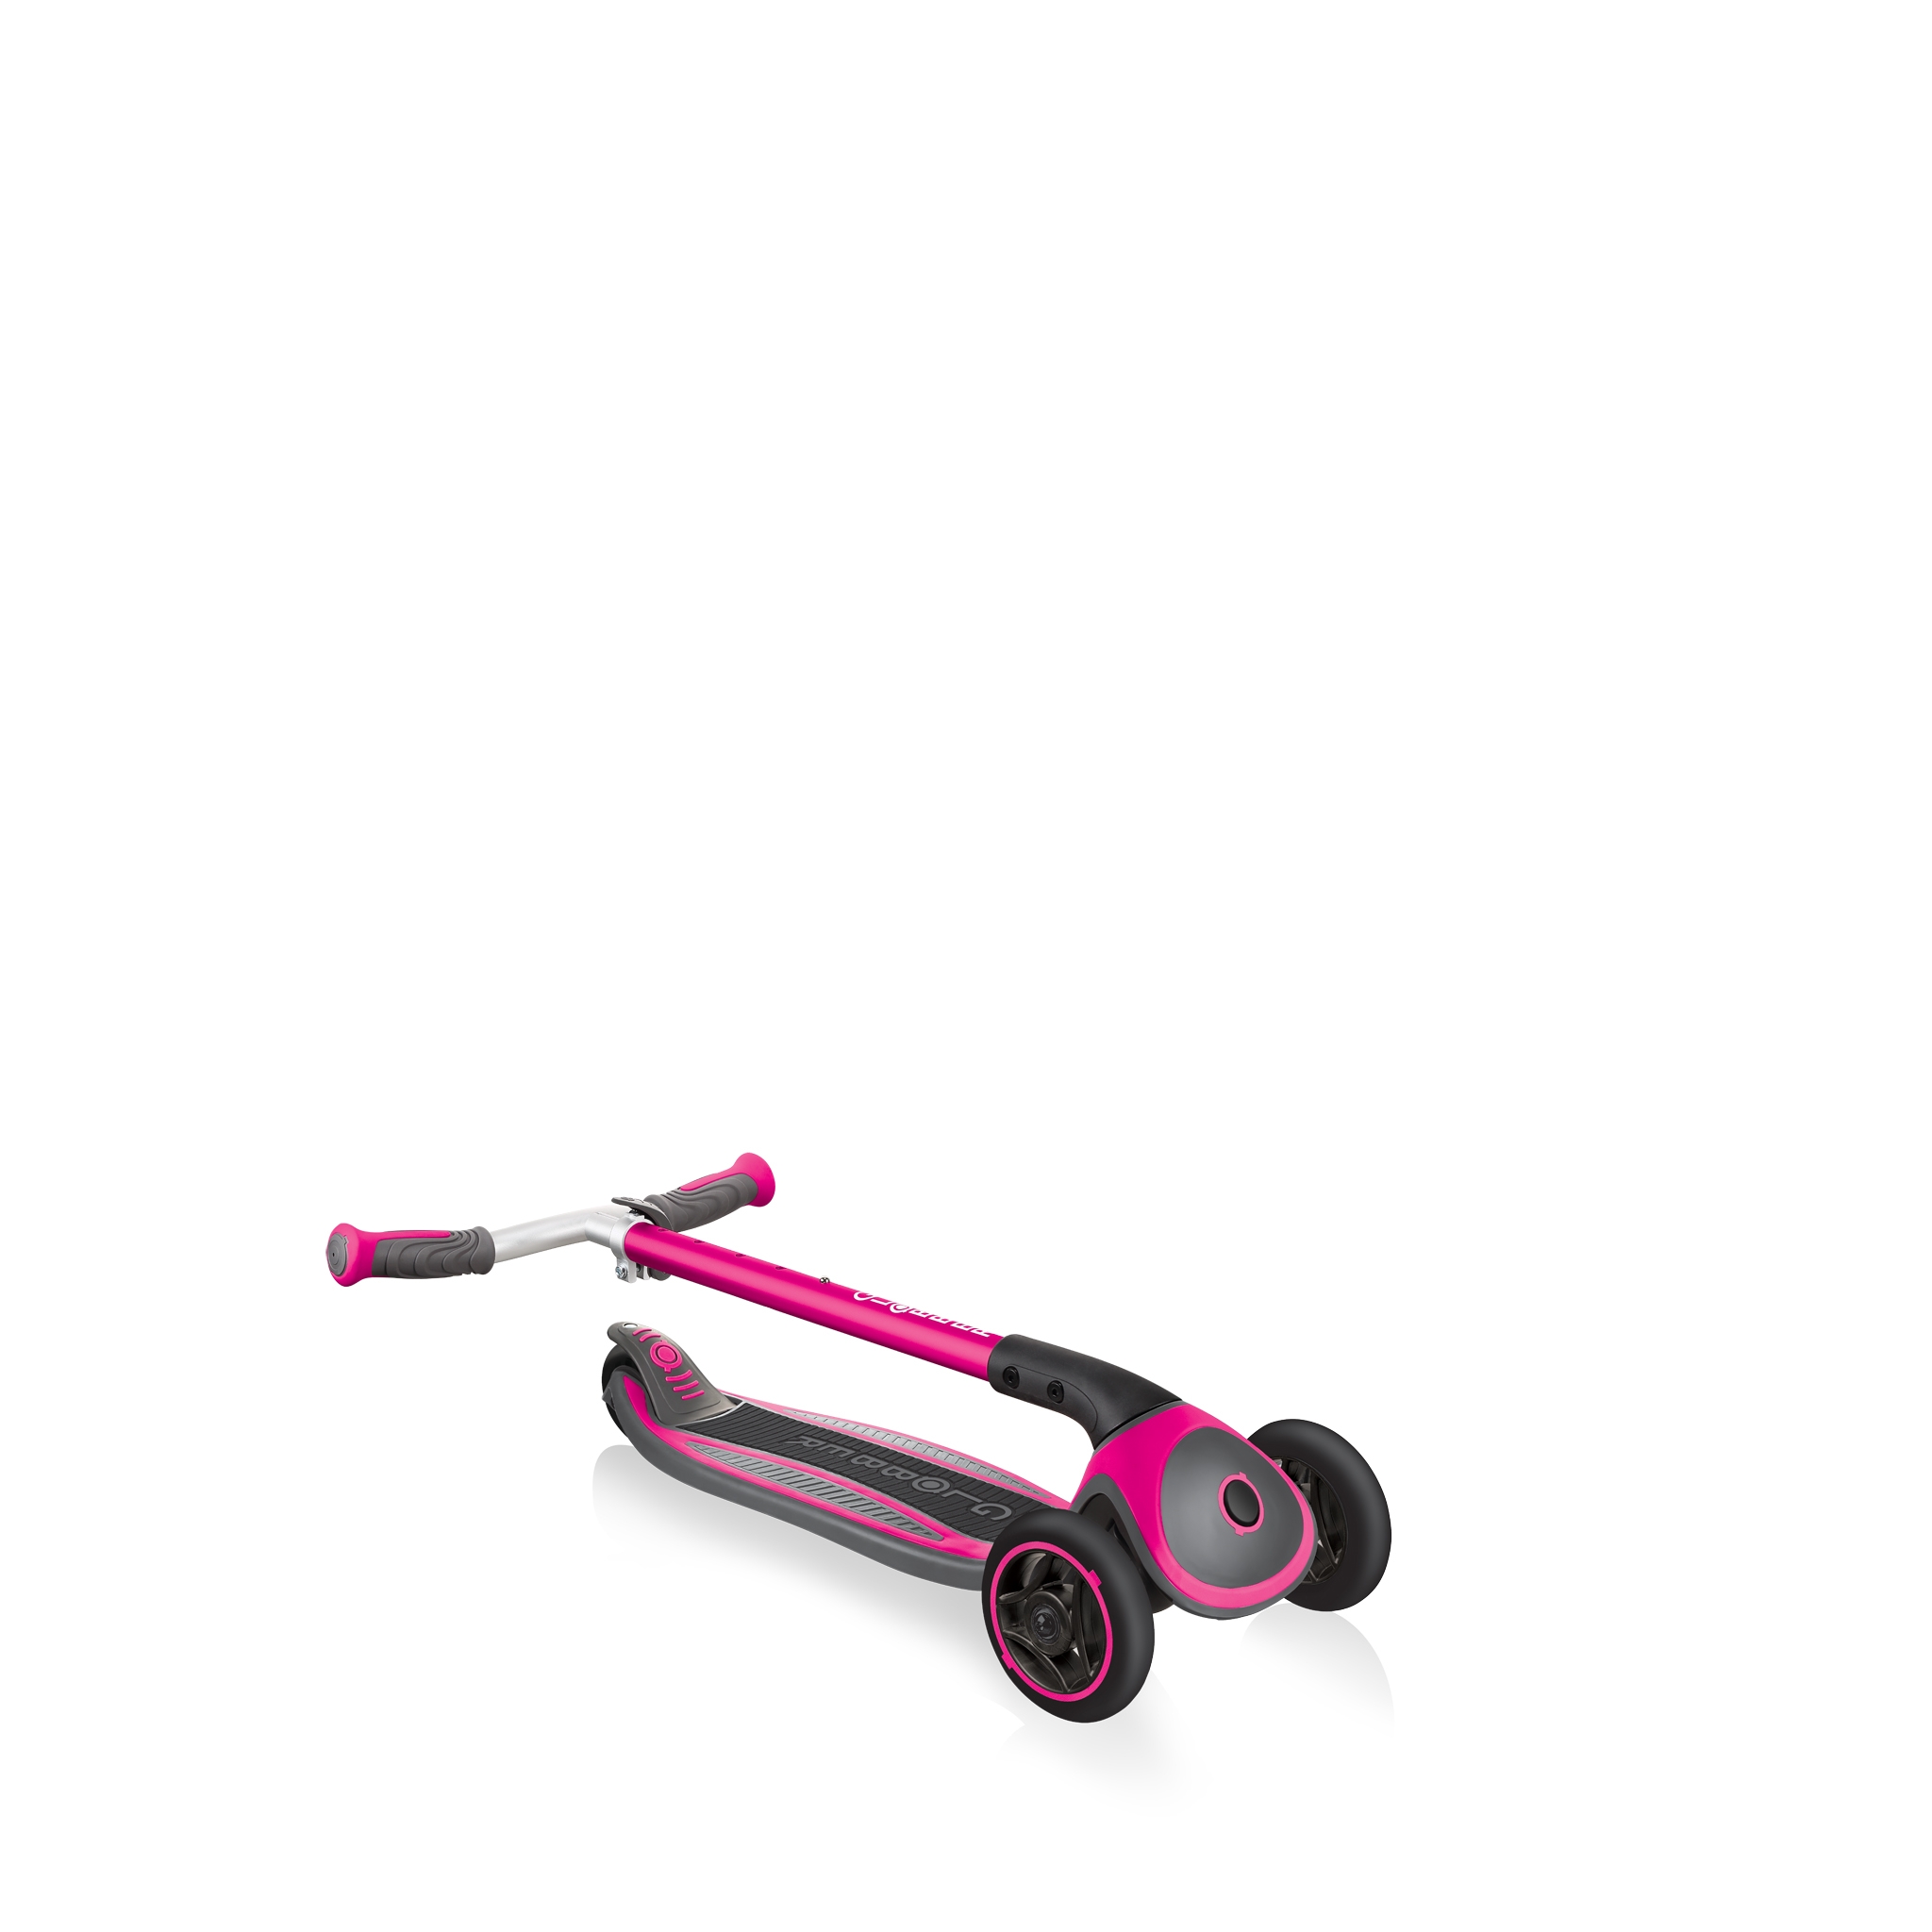 Globber-MASTER-convenient-foldable-3-wheel-scooter-for-kids-with-patented-folding-system_deep-pink 3